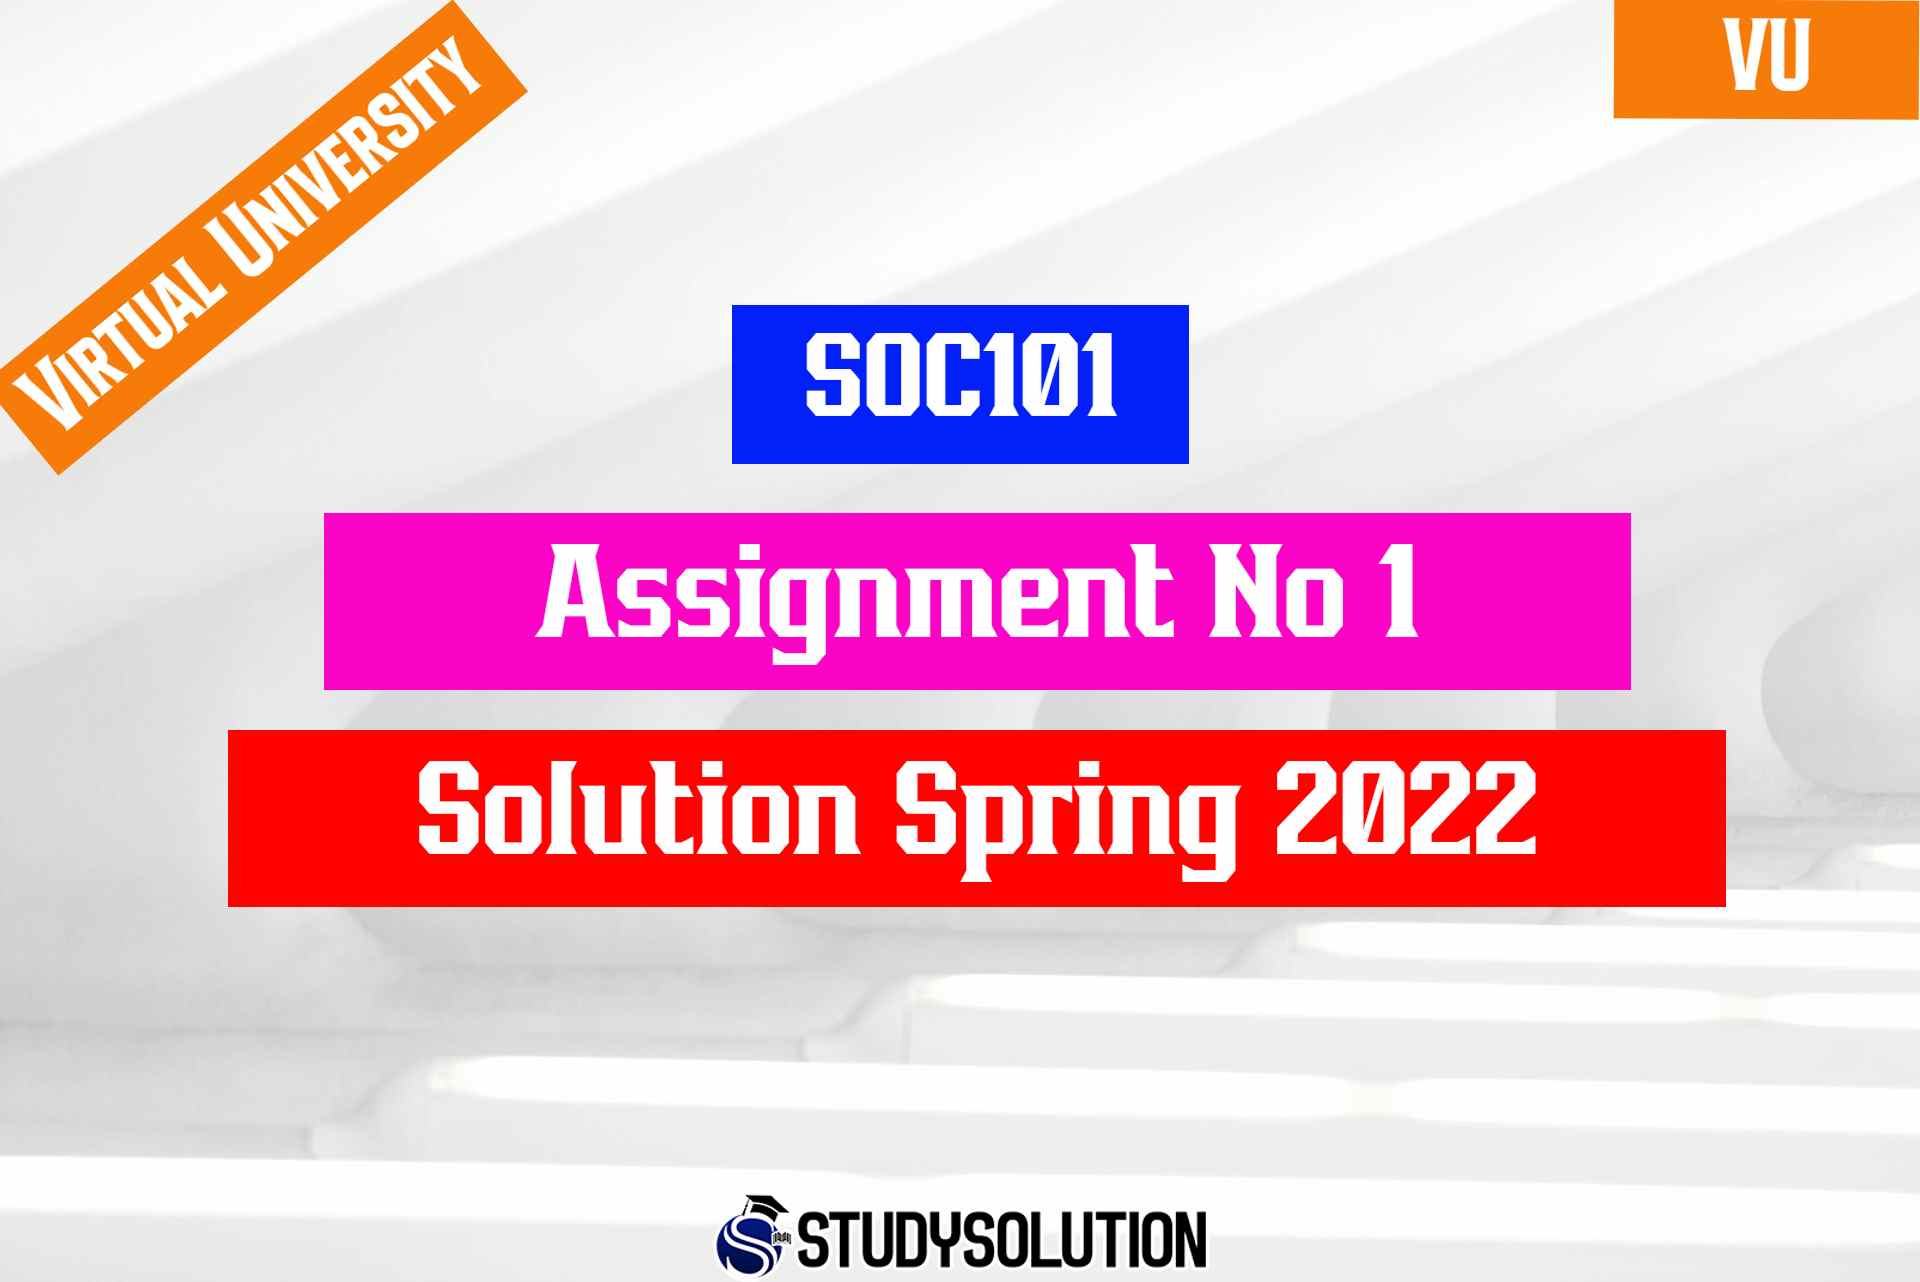 SOC101 Assignment No 1 Solution Spring 2022